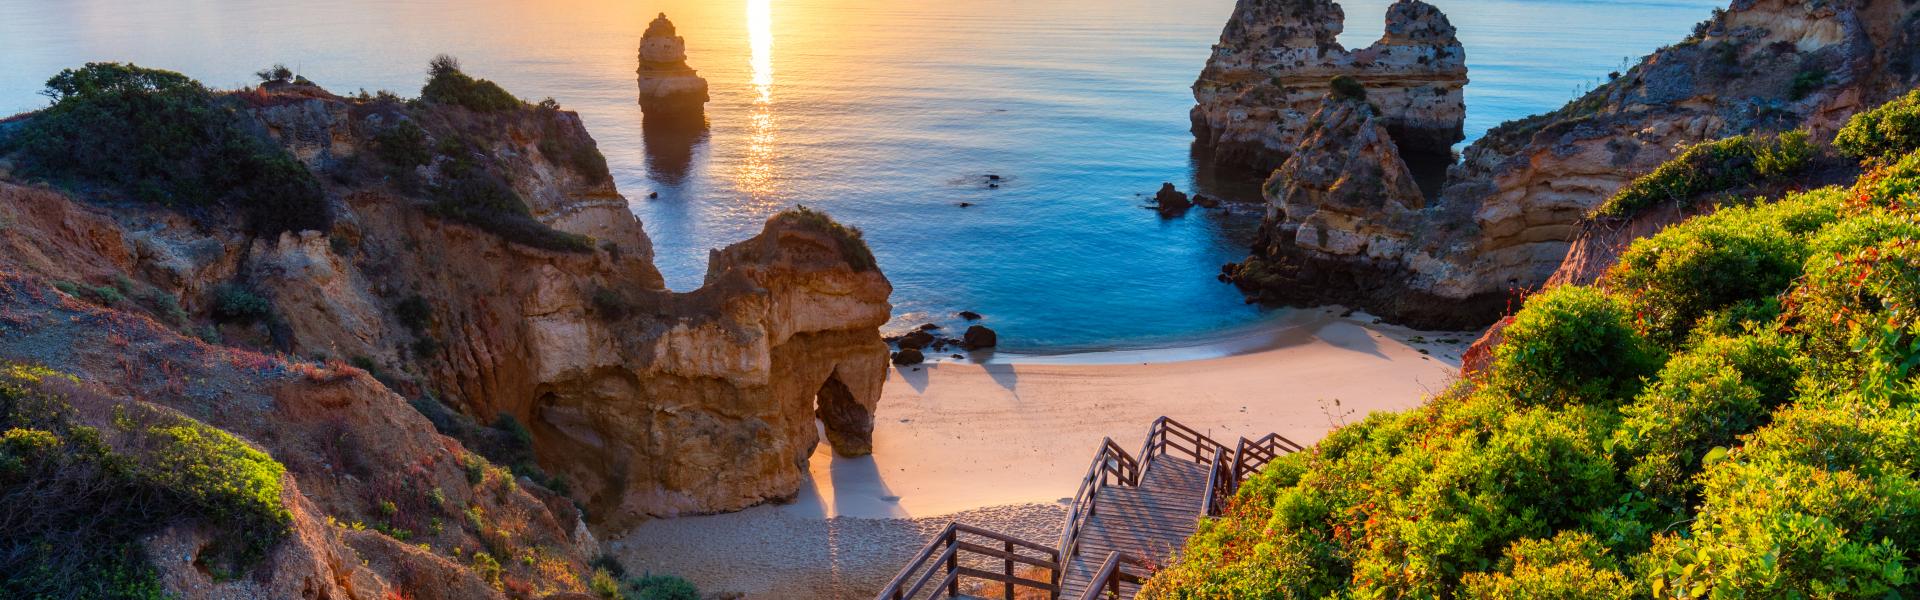 A Natural View of Algarve